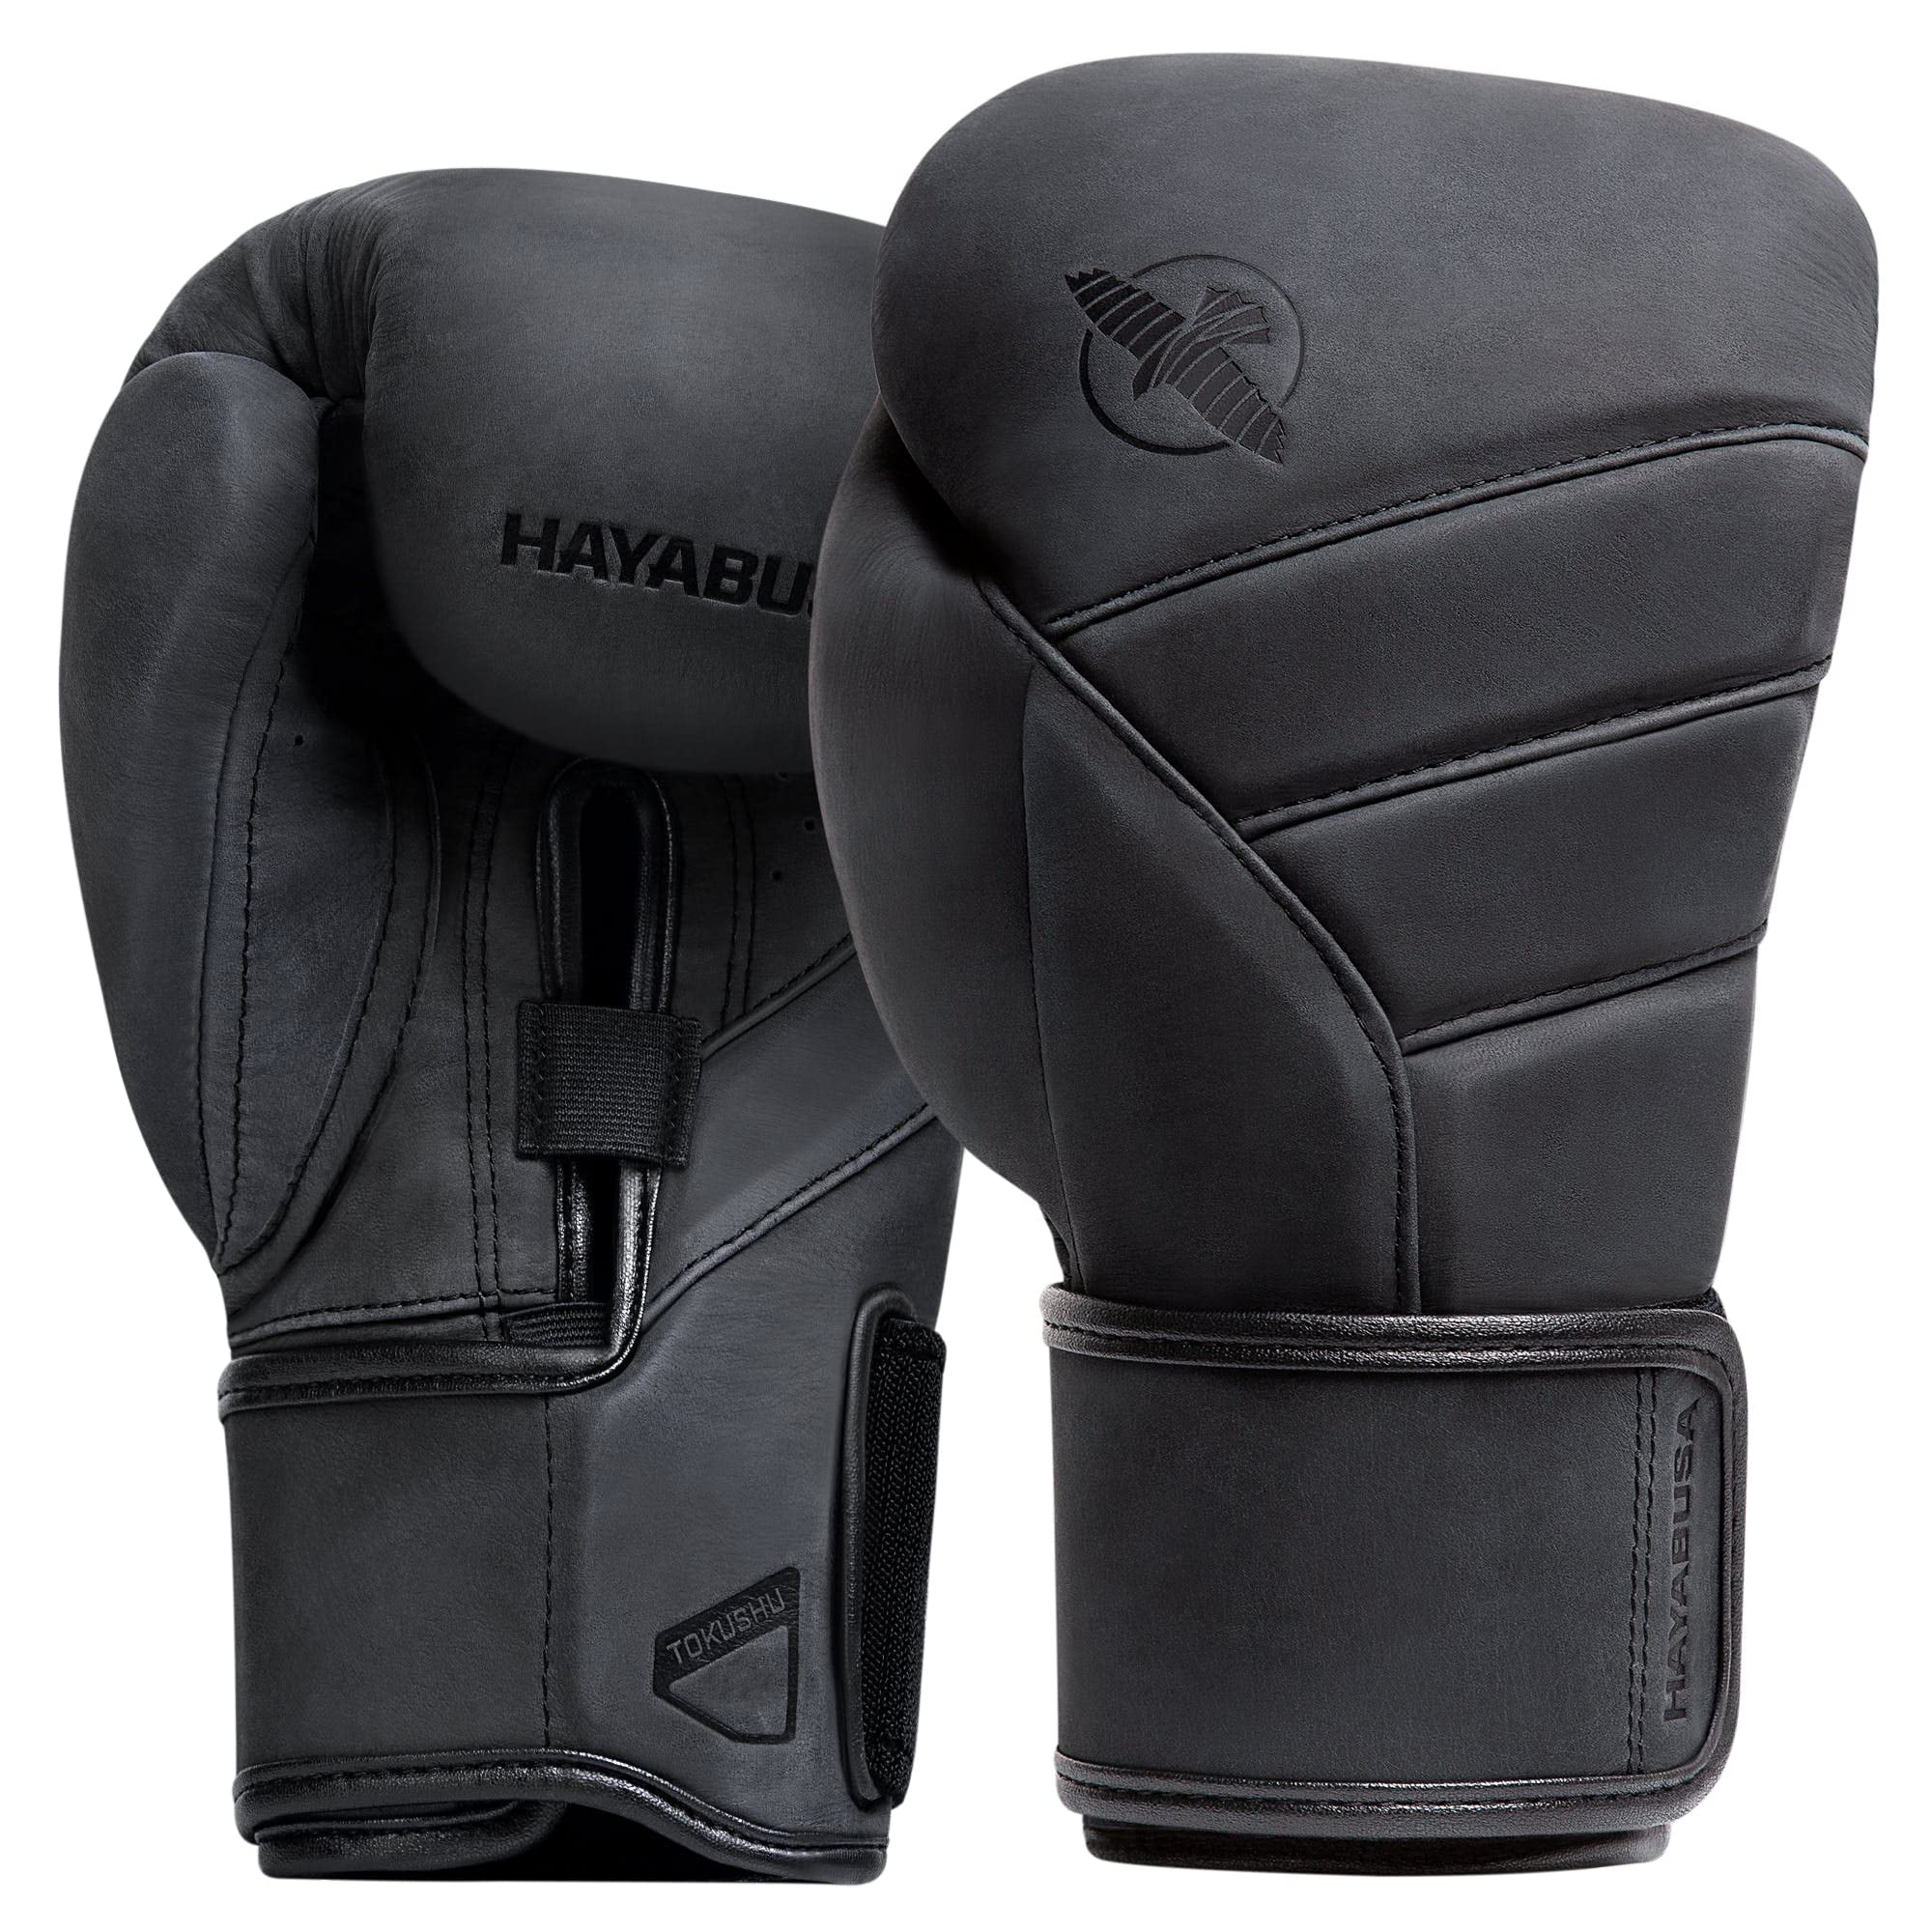 Hayabusa T3 LX Leather Boxing gloves Men and Women for Training Sparring Heavy Bag and Mitt Work - Obsidan, 12 oz